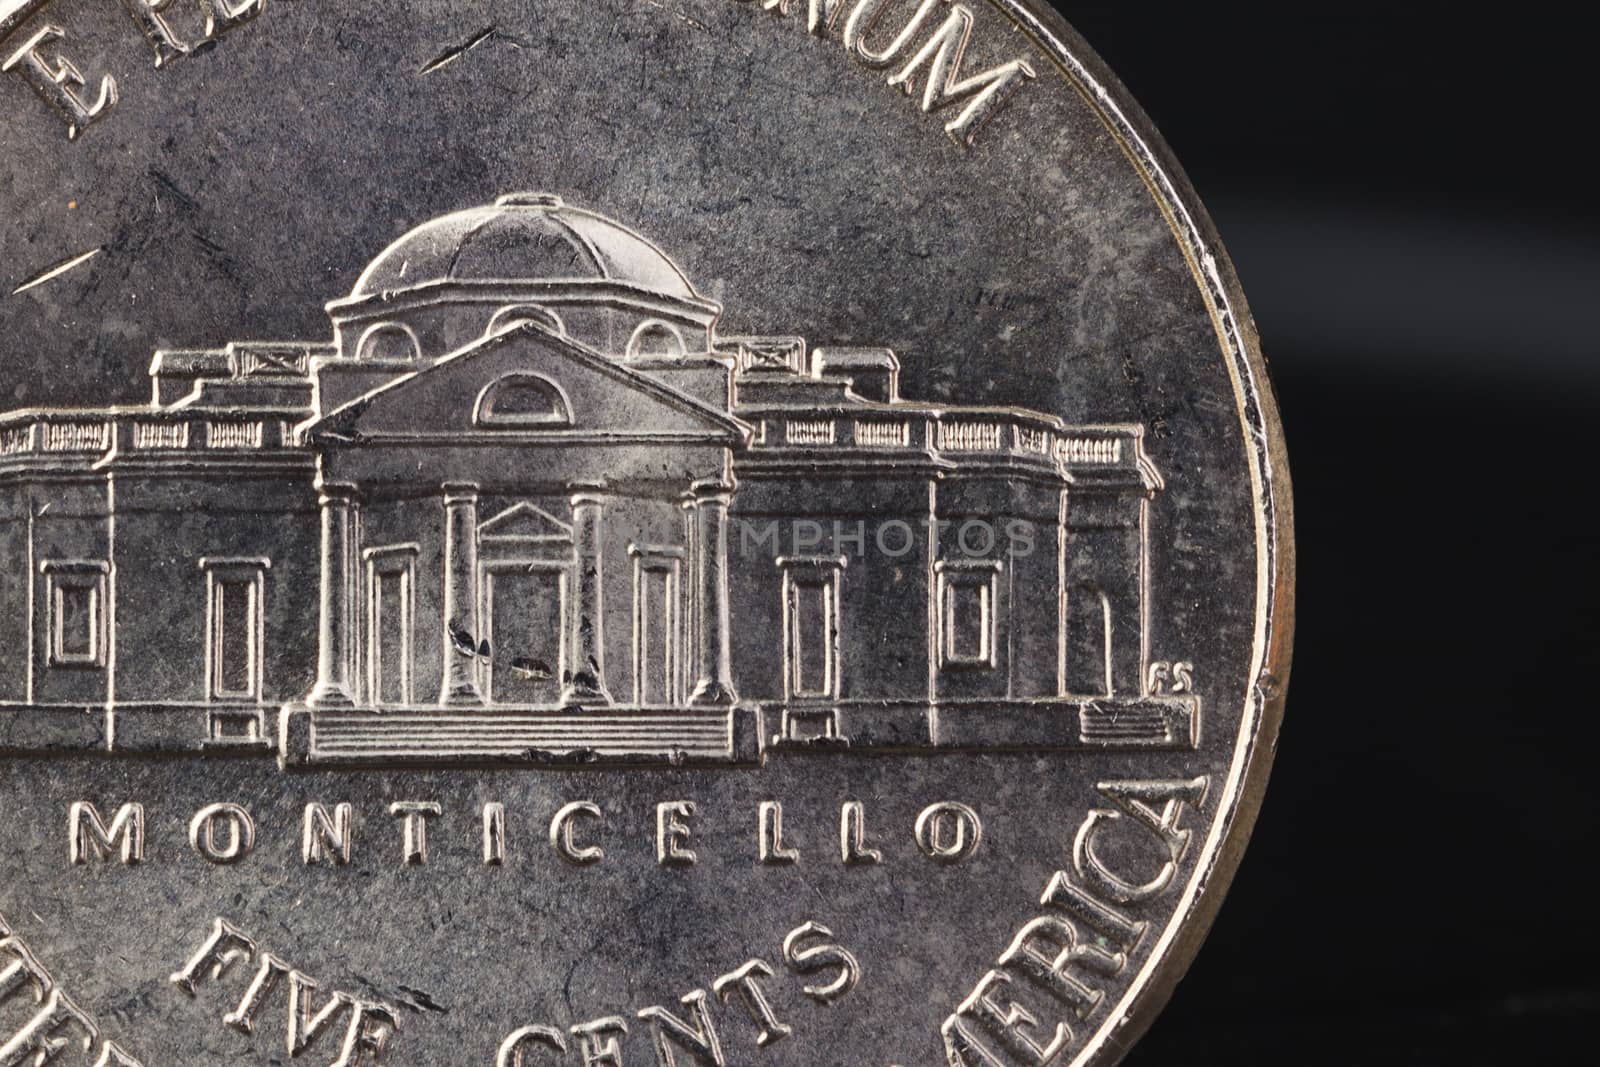 US American coin with wording "monticello" on black background